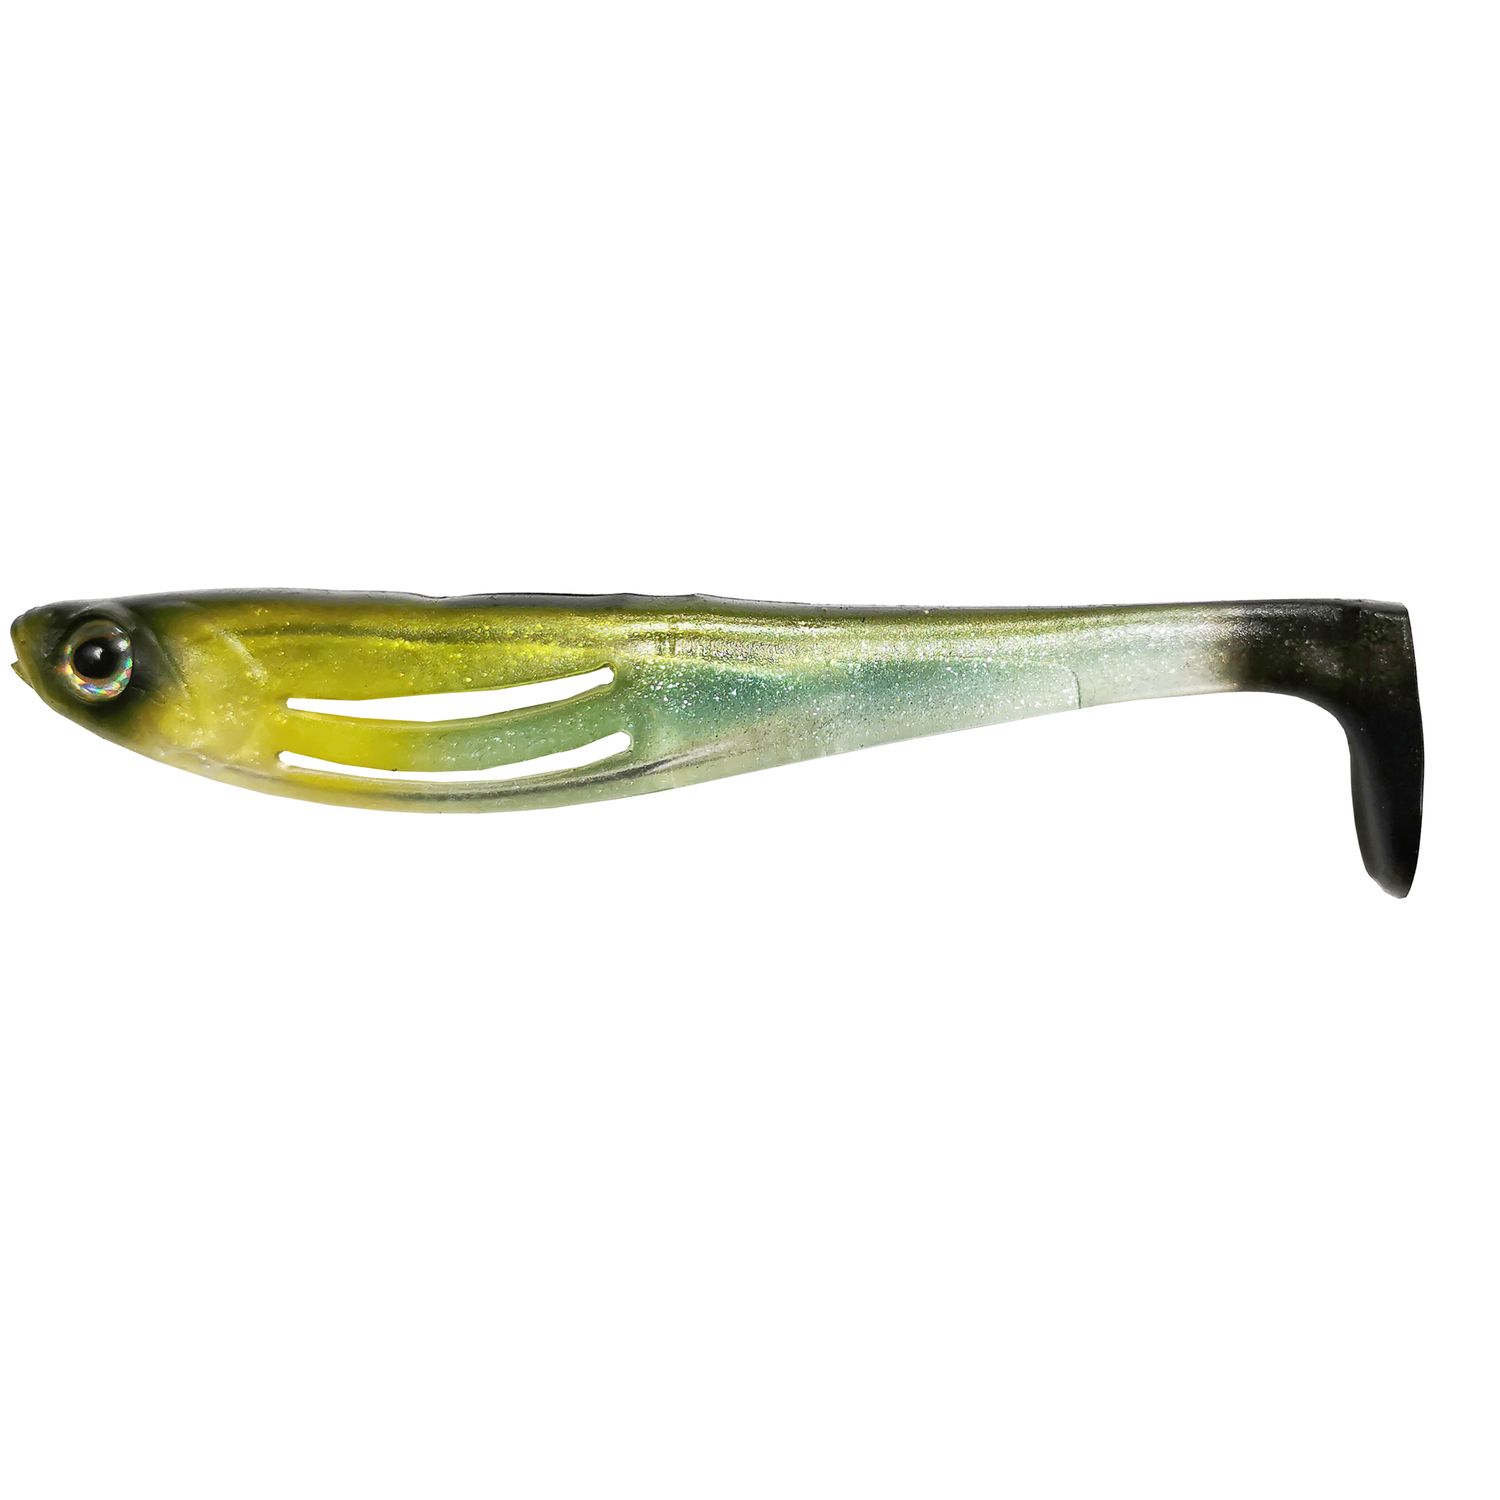 FLAT SHAD PRO LURES, Colour: ABS IN THE BLACK